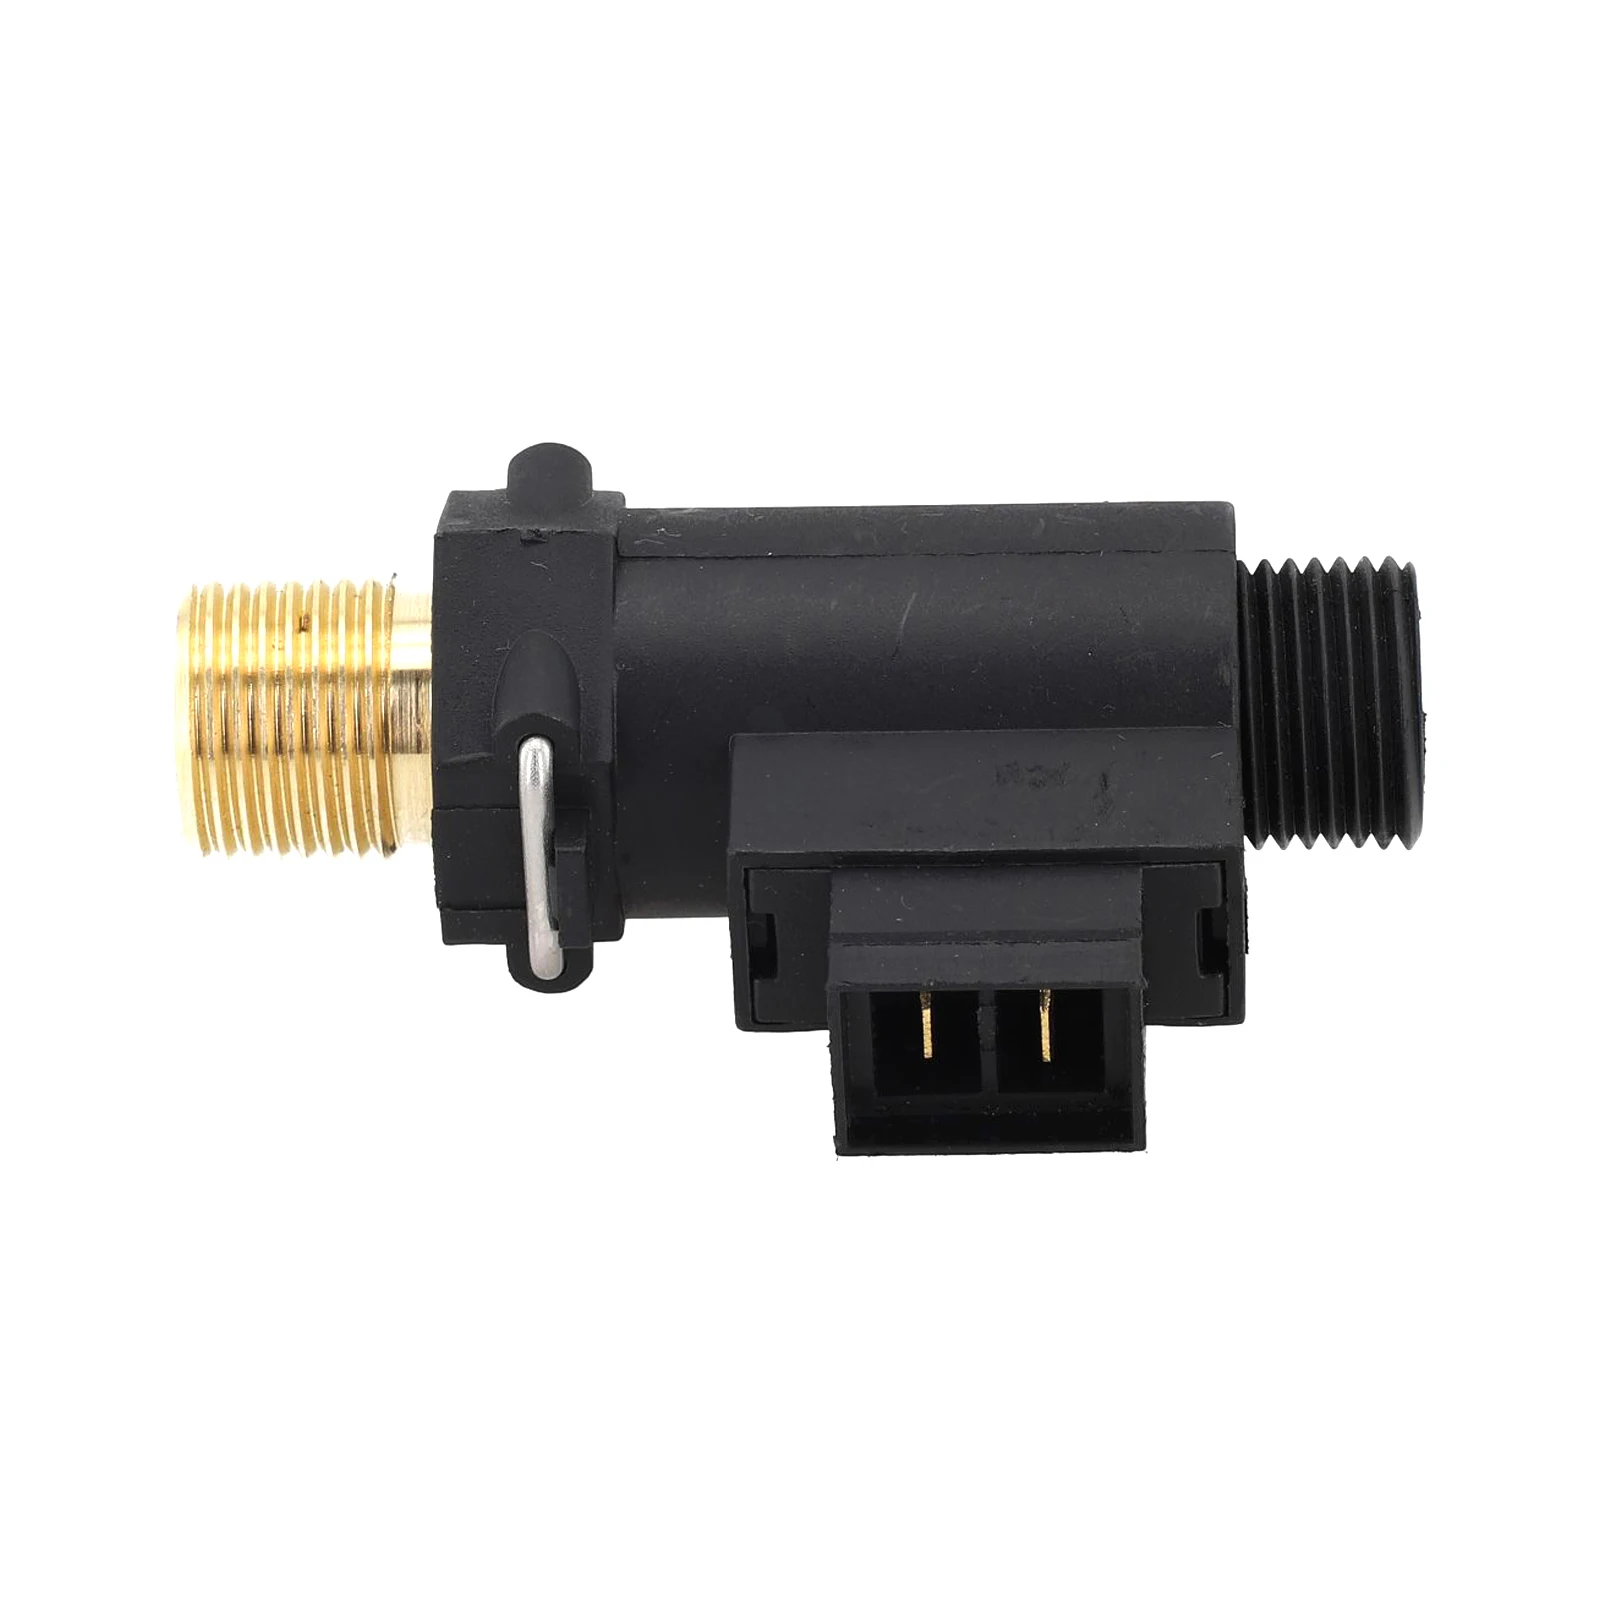 

Boiler Parts Water Flow Sensor Switch for Ariston & Baxi Main Four & Beretta Reliable Performance and Precise Flow Sensing